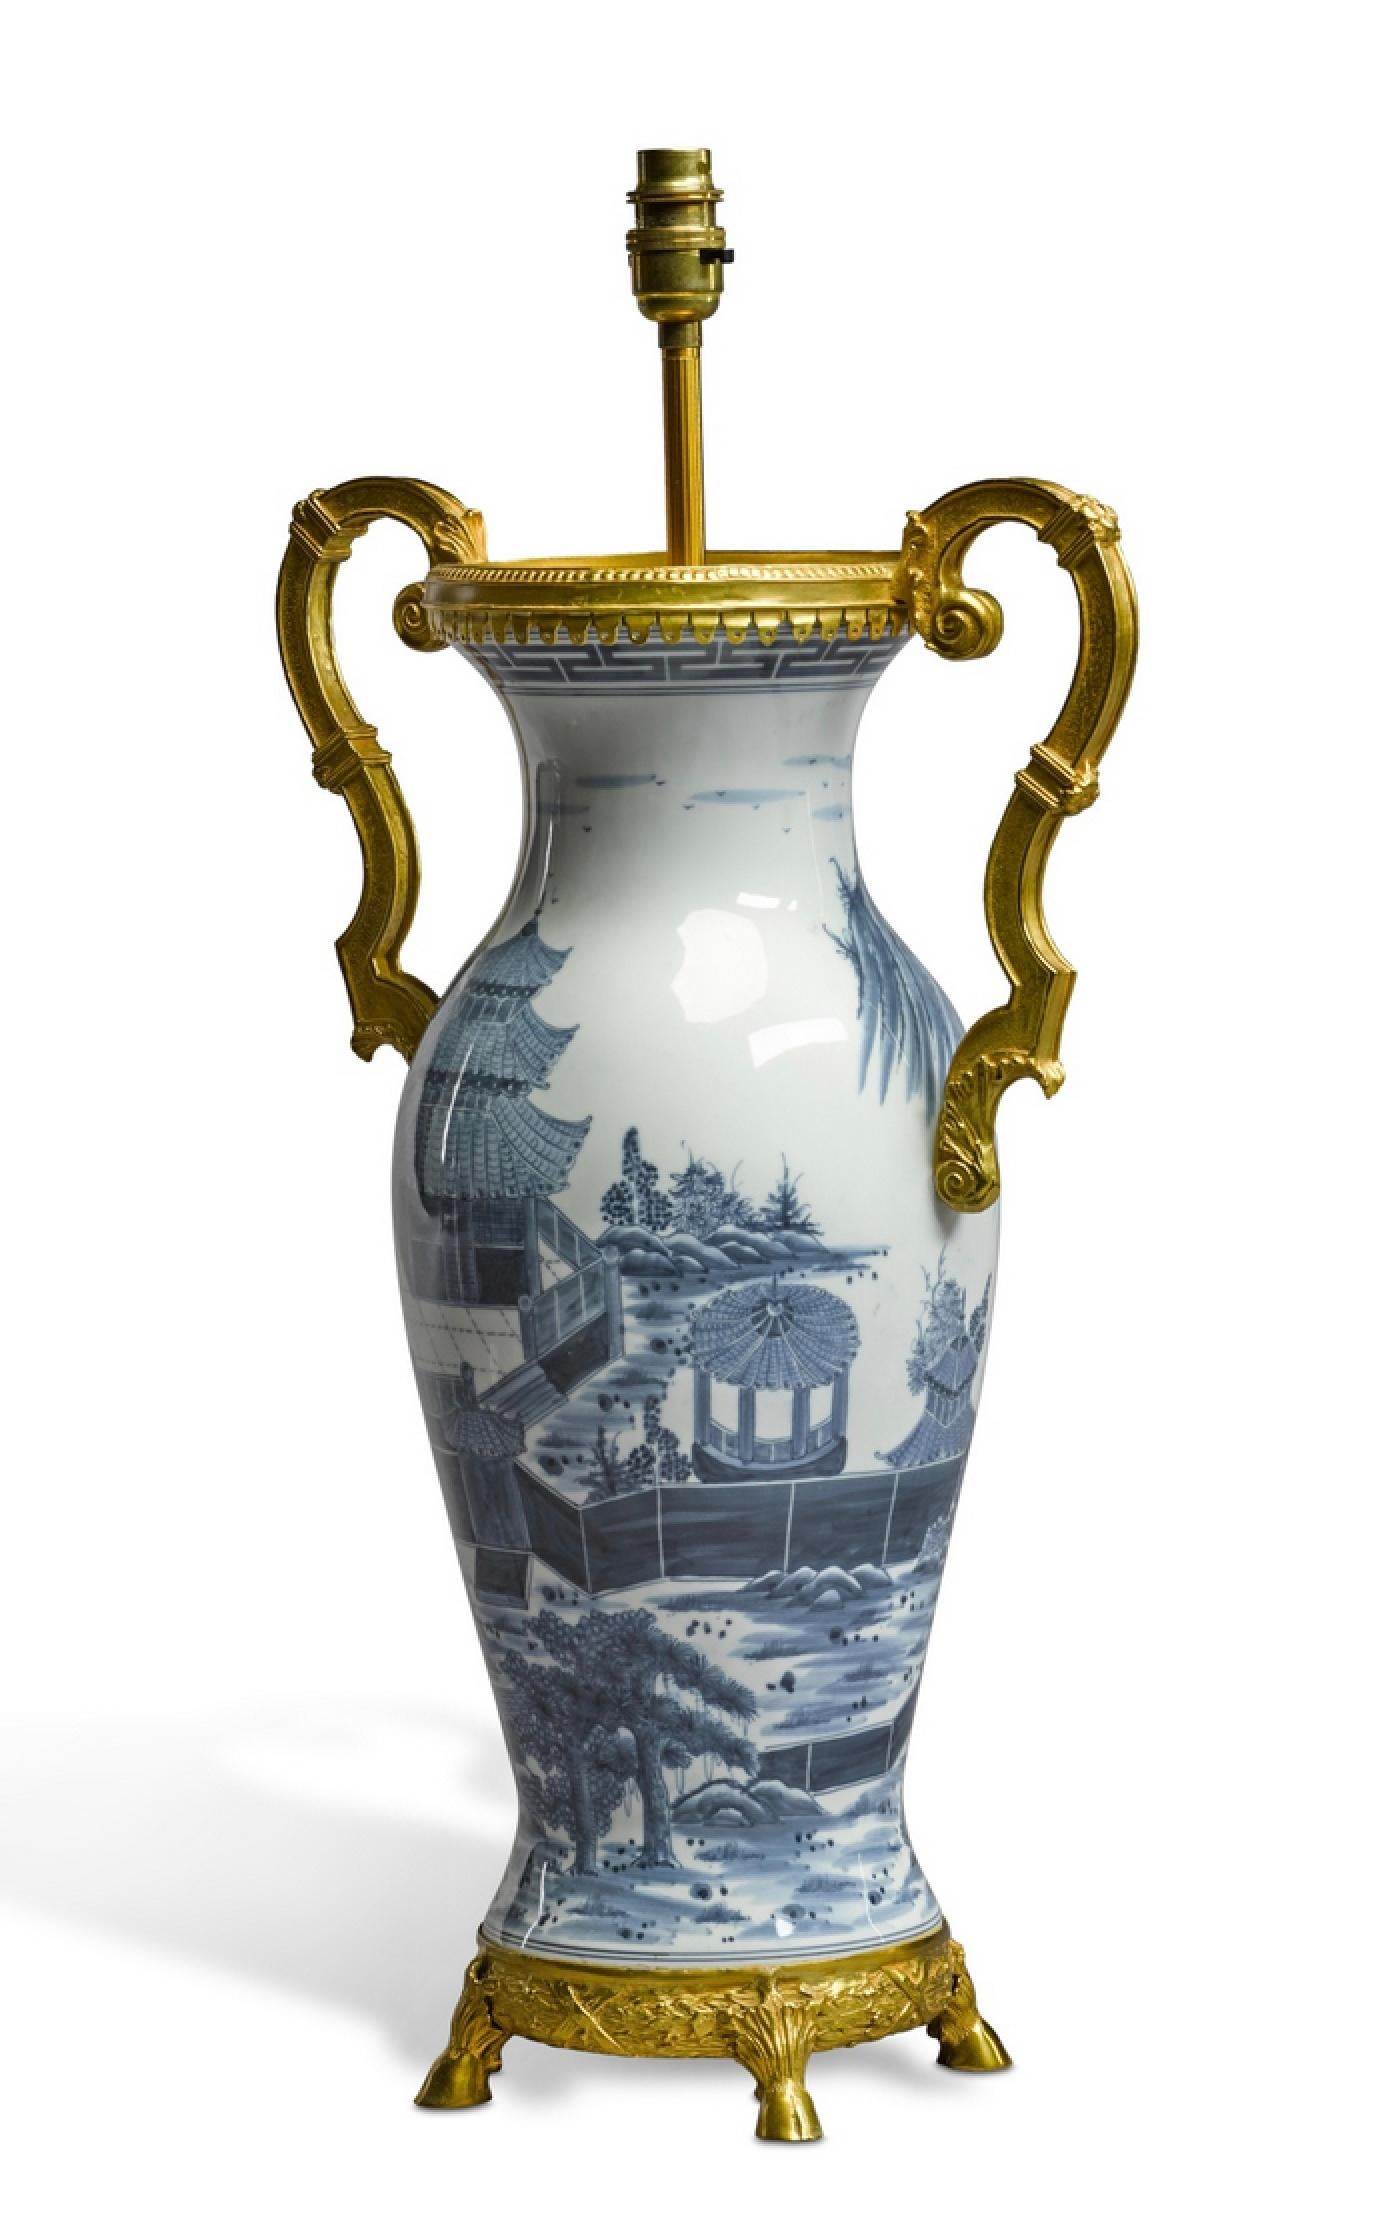 A superb Chinese blue and white porcelain baluster vase embellished with fine ormolu mounts including winged handles.
The vase decorated in tones of blue on white depictig a village scene with houses, pavilions and trees. Now mounted as a